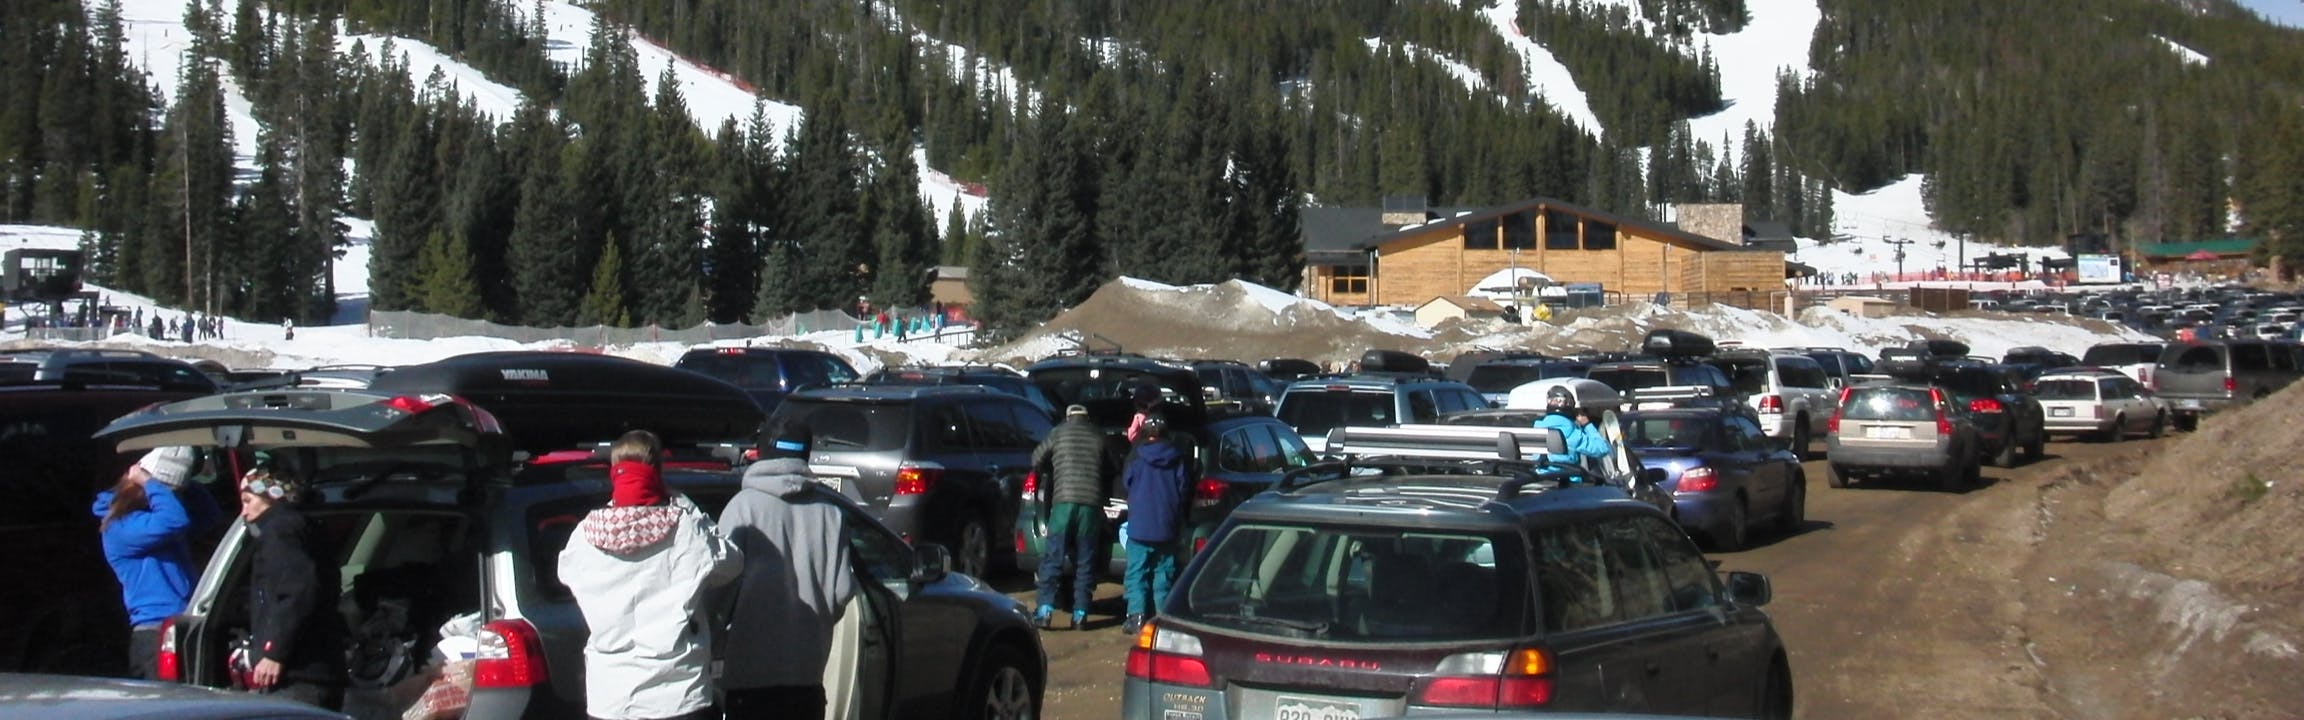 Several skiers getting ready for skiing in the parking lot of a ski resort. 